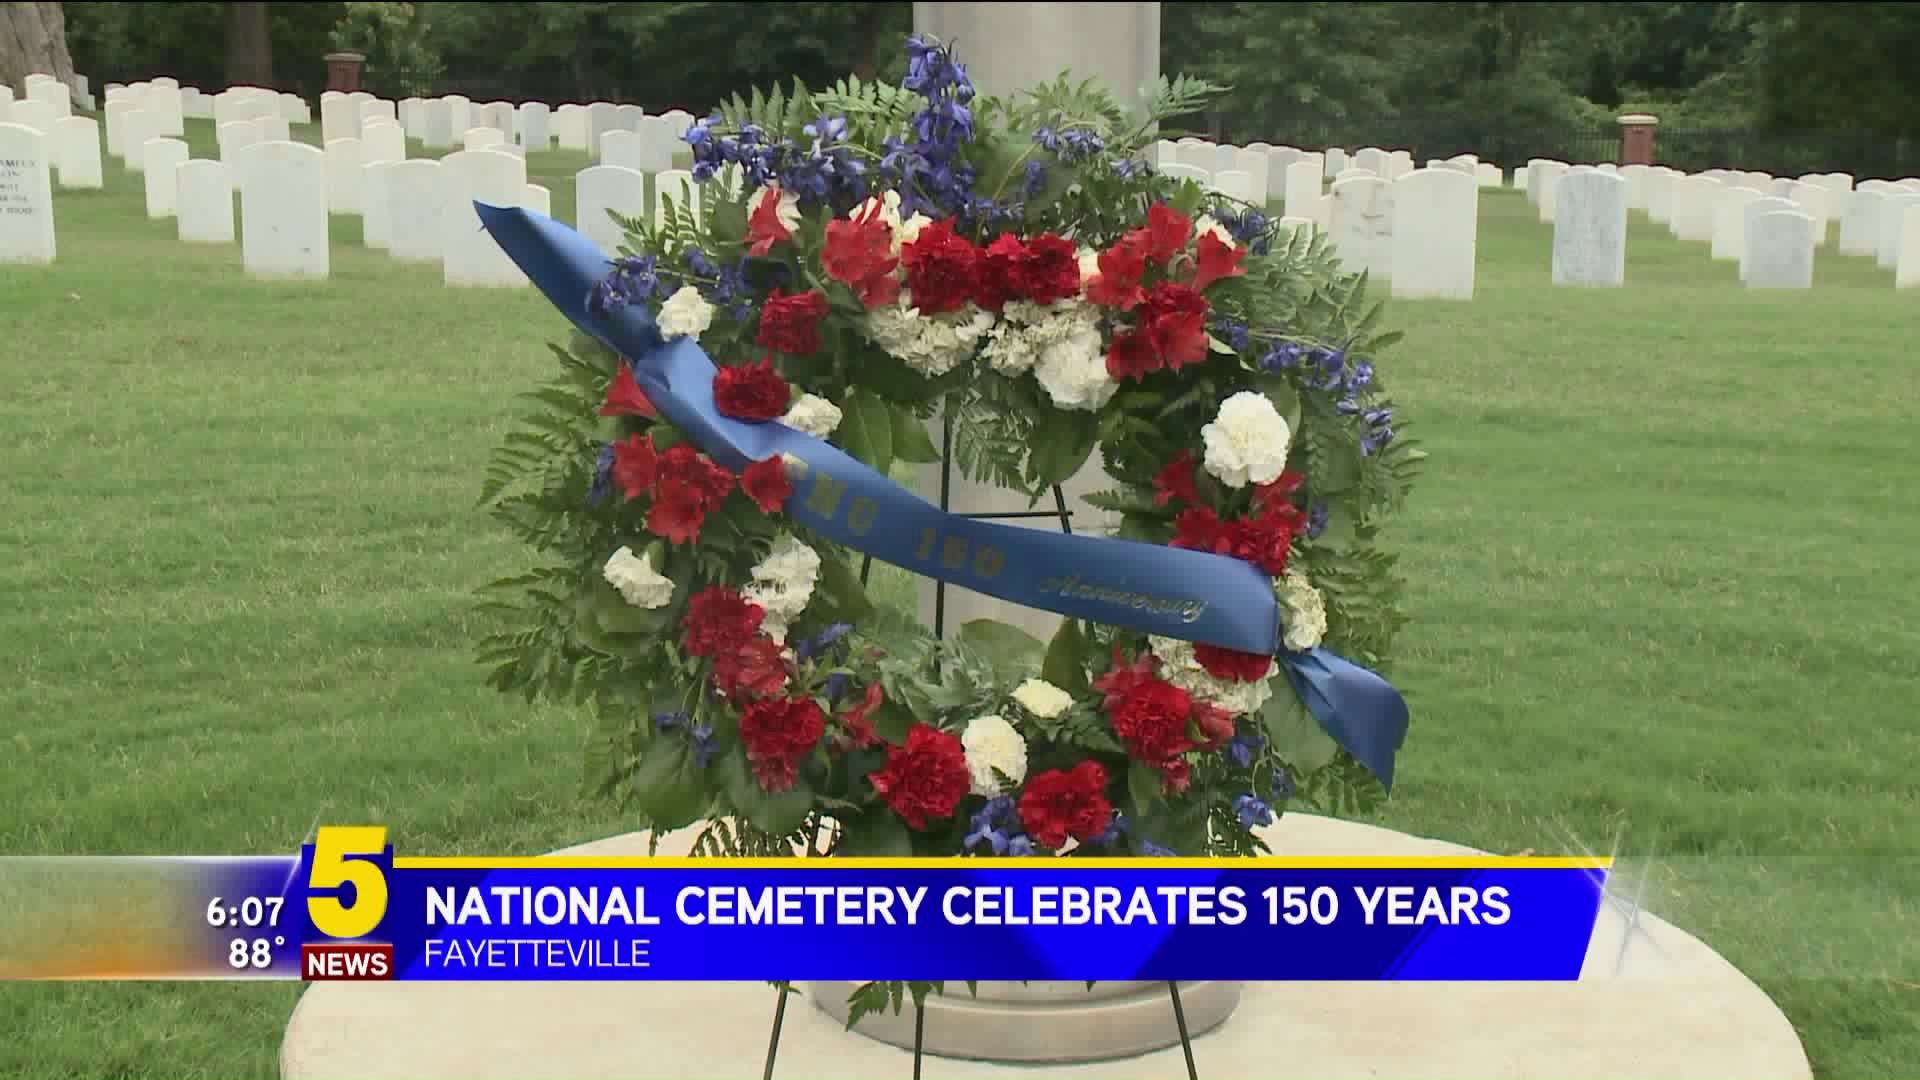 National Cemetery Celebrates 150 Years